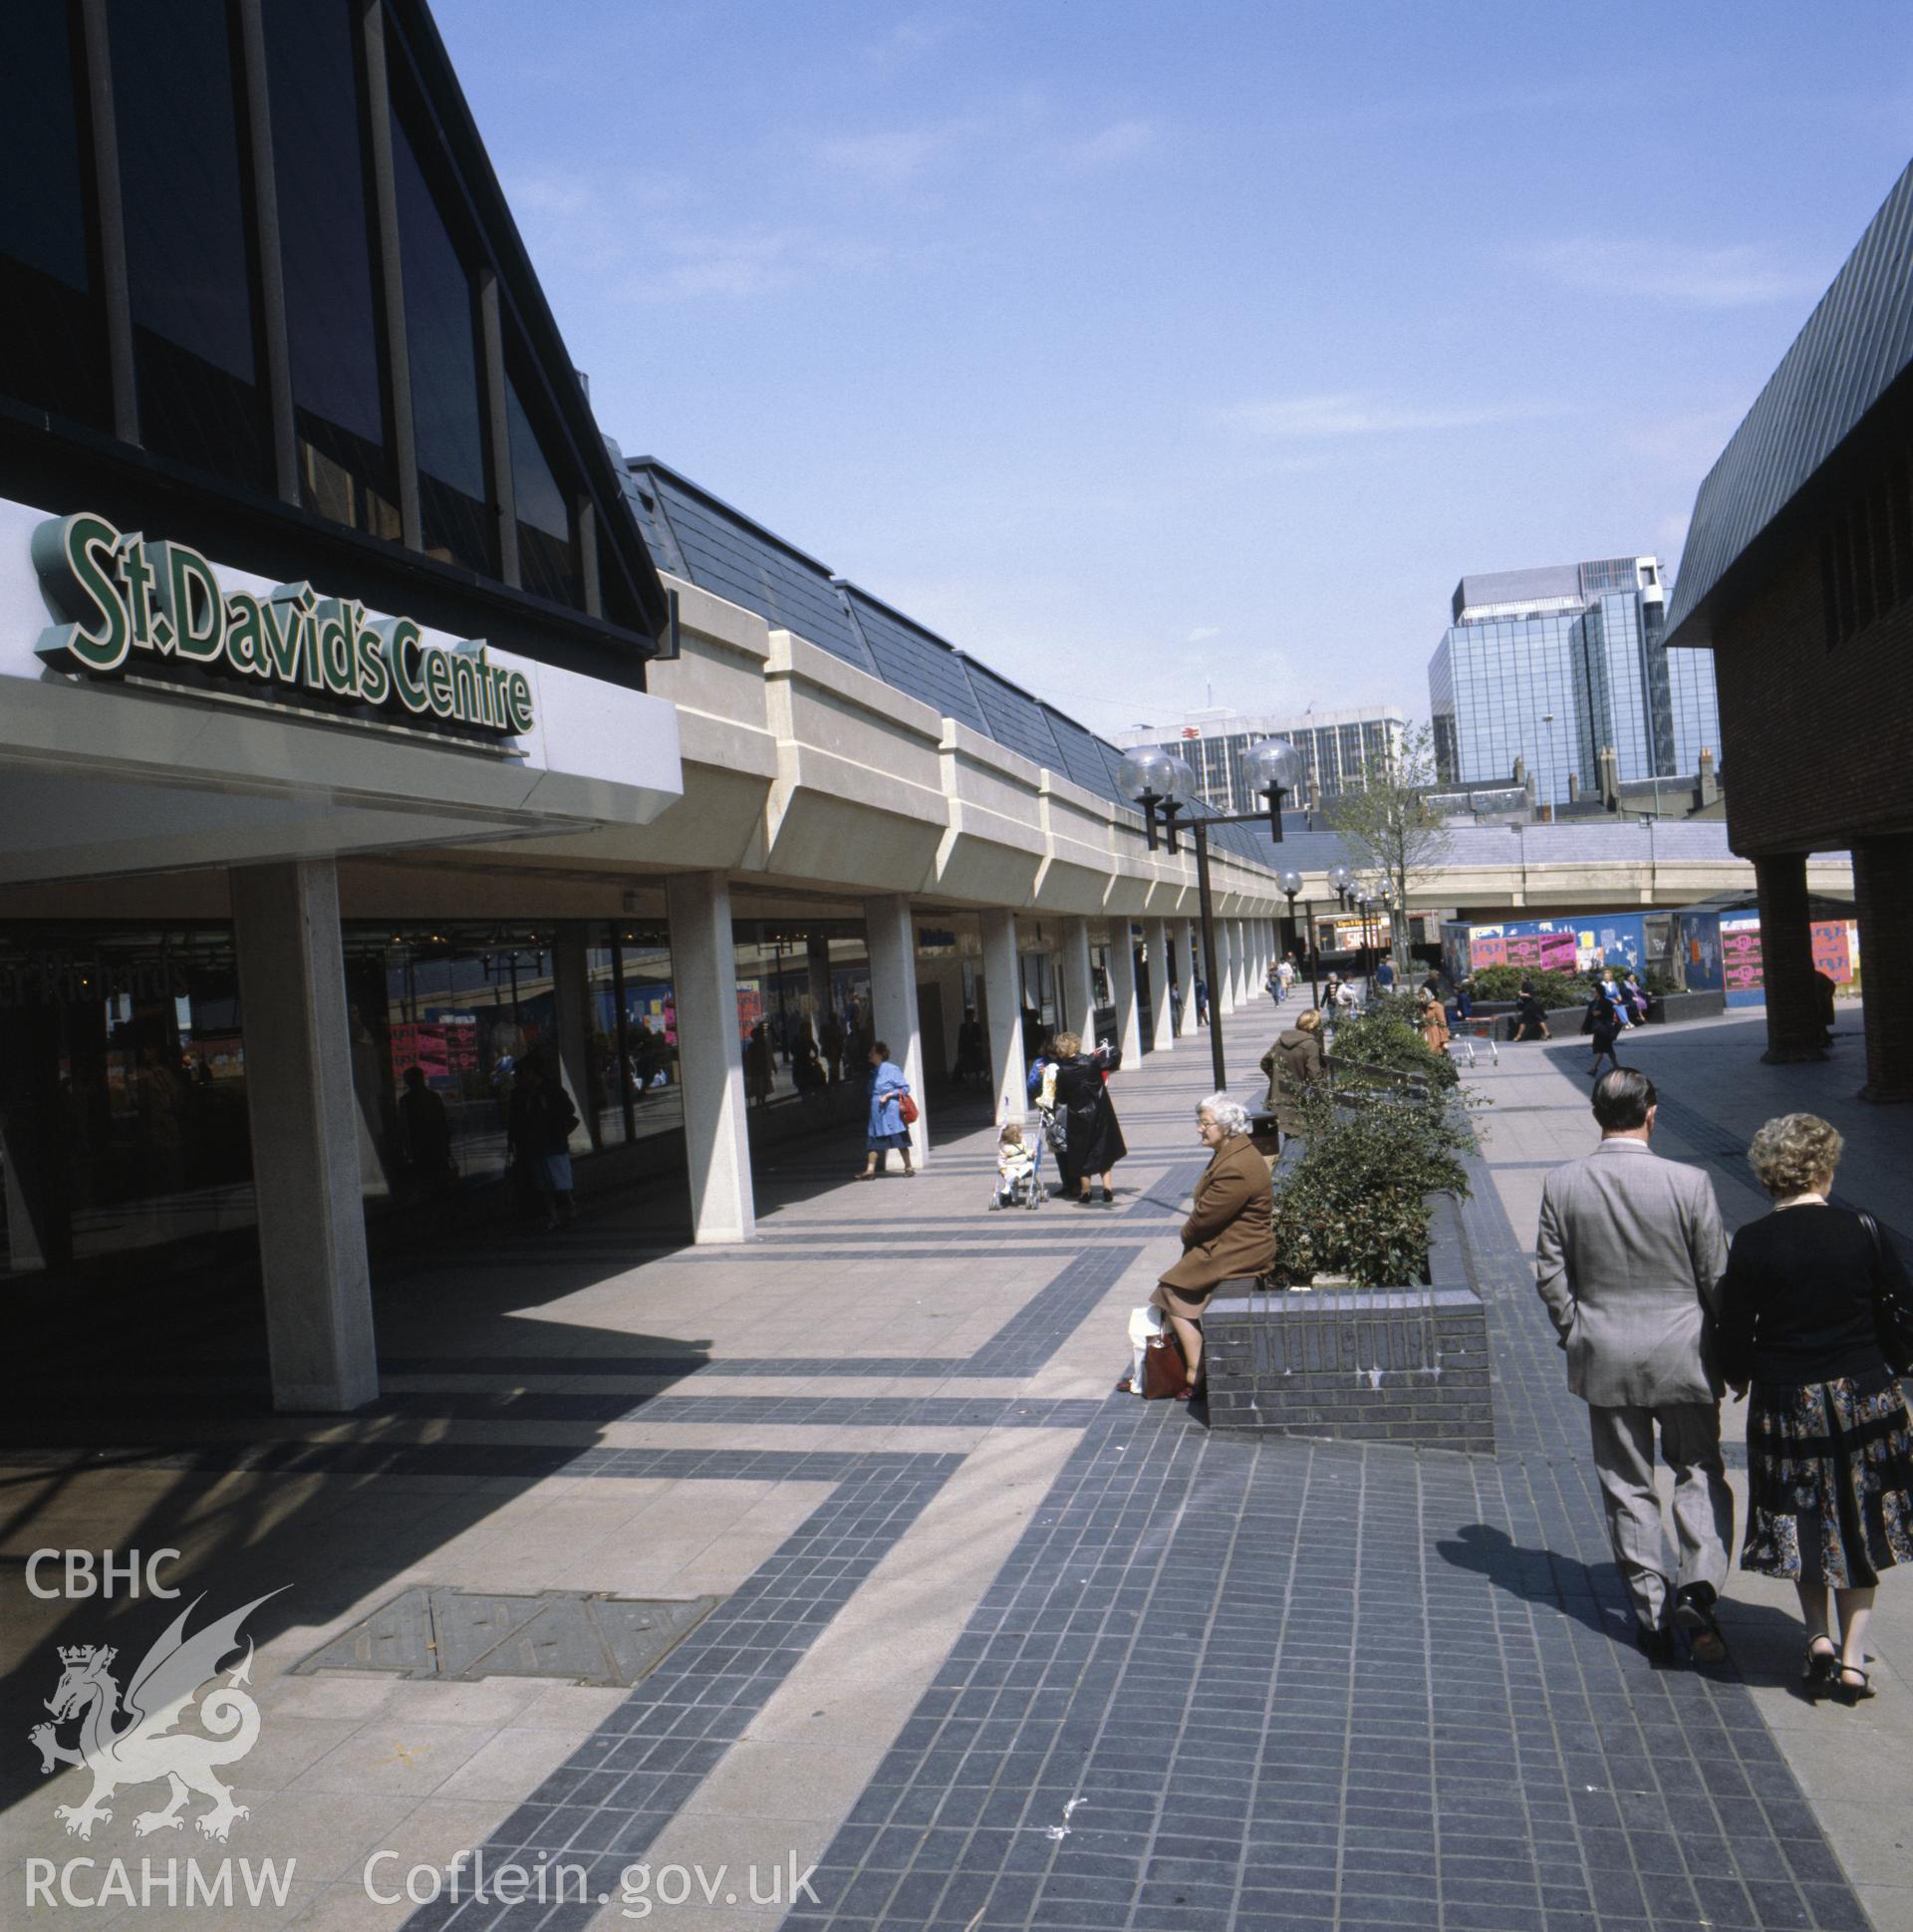 1 colour transparency showing street scene outside St David's Centre, Cardiff with shoppers; collated by the former Central Office of Information.